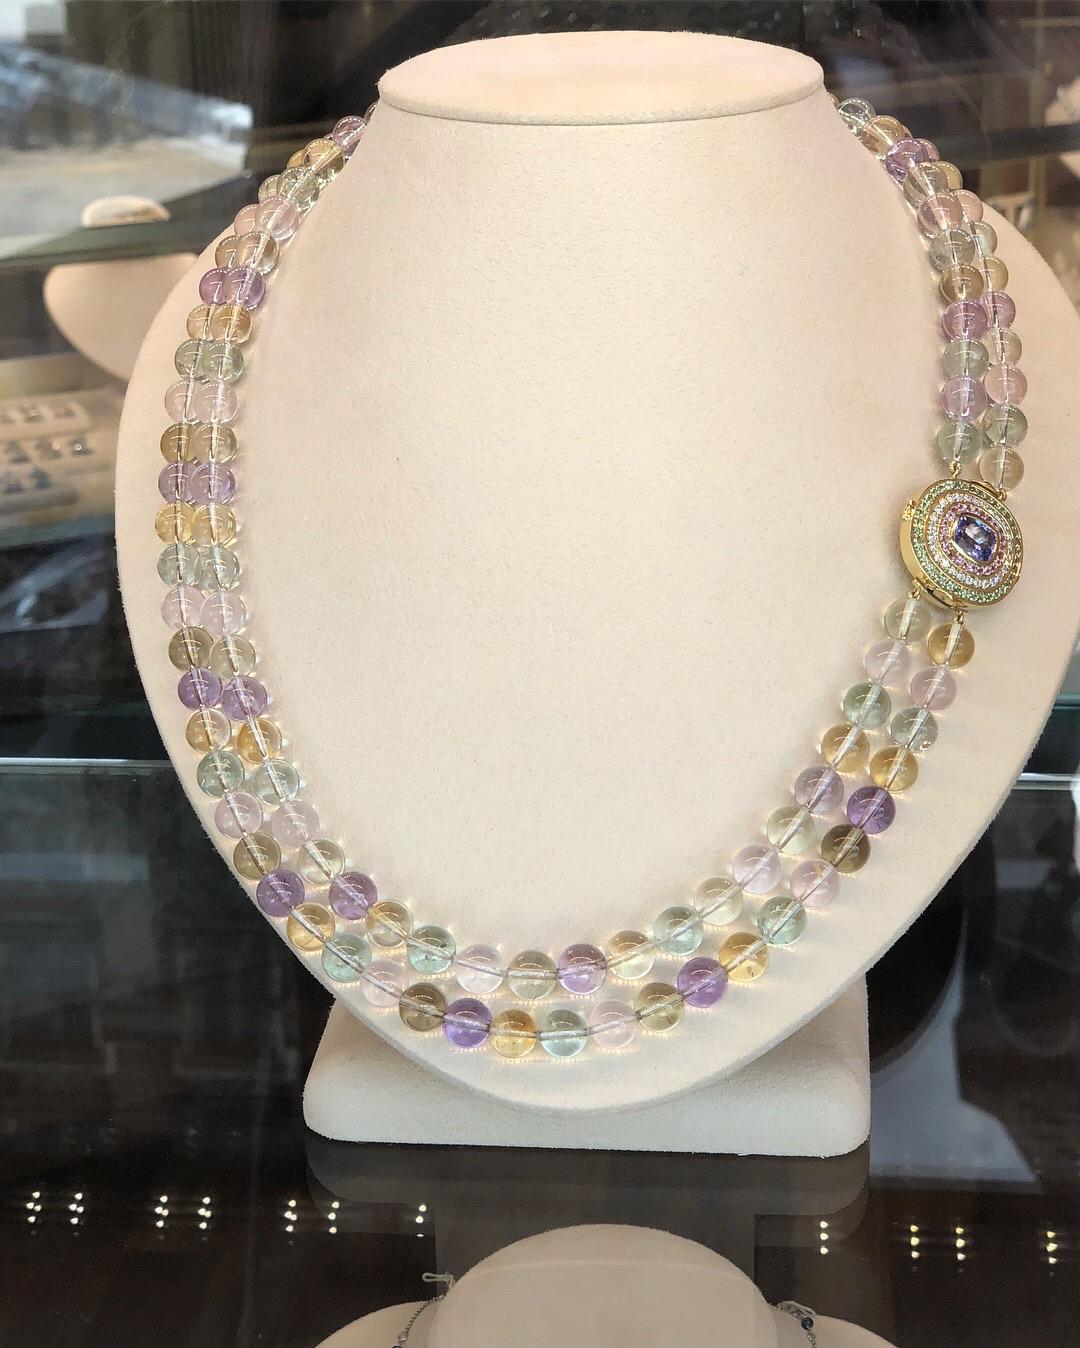 A beautiful necklace made of 921 carats of 10mm natural spodumene beads in a variety of graduated colors. Spodumene is also known more commonly as Kunzite for the pinkish violet variety or Hiddenite for the Green variety. Colors outside of the